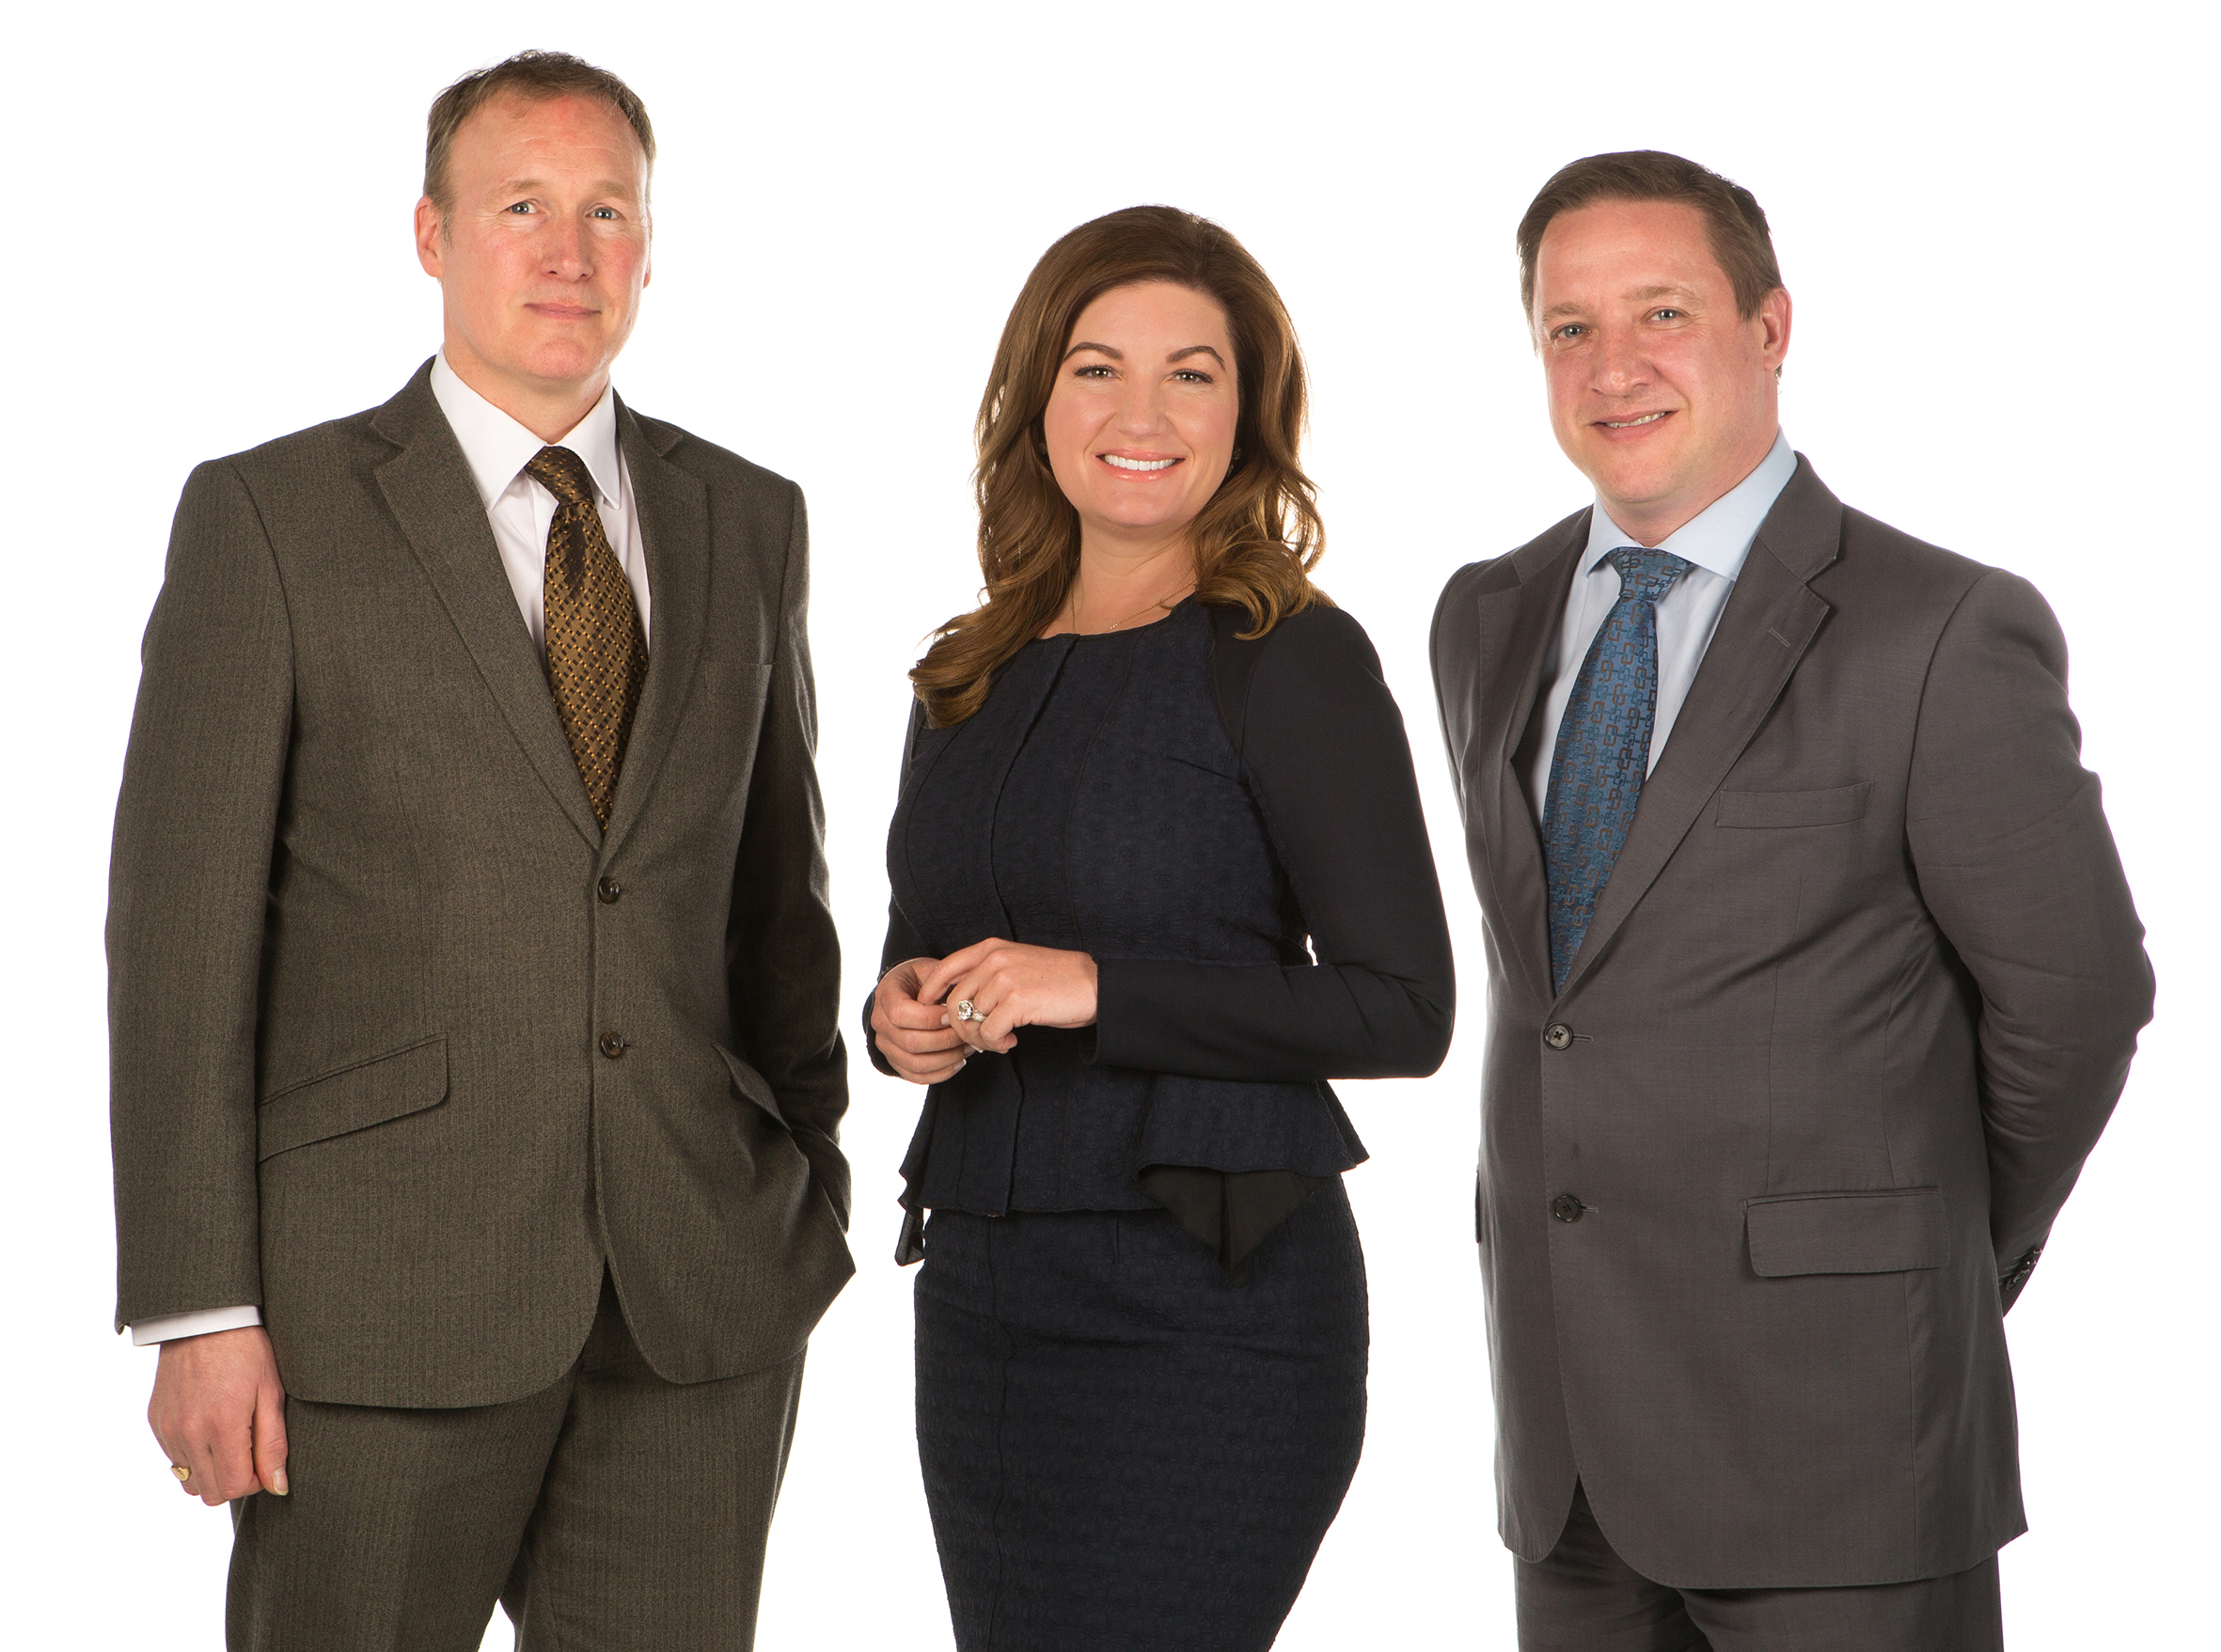 Left to right – Karren Brady CBE, Baroness of Knightsbridge & award winning business woman pictured with Ron Myers and Martyn Roe, Directors of HydraFacial UK.’